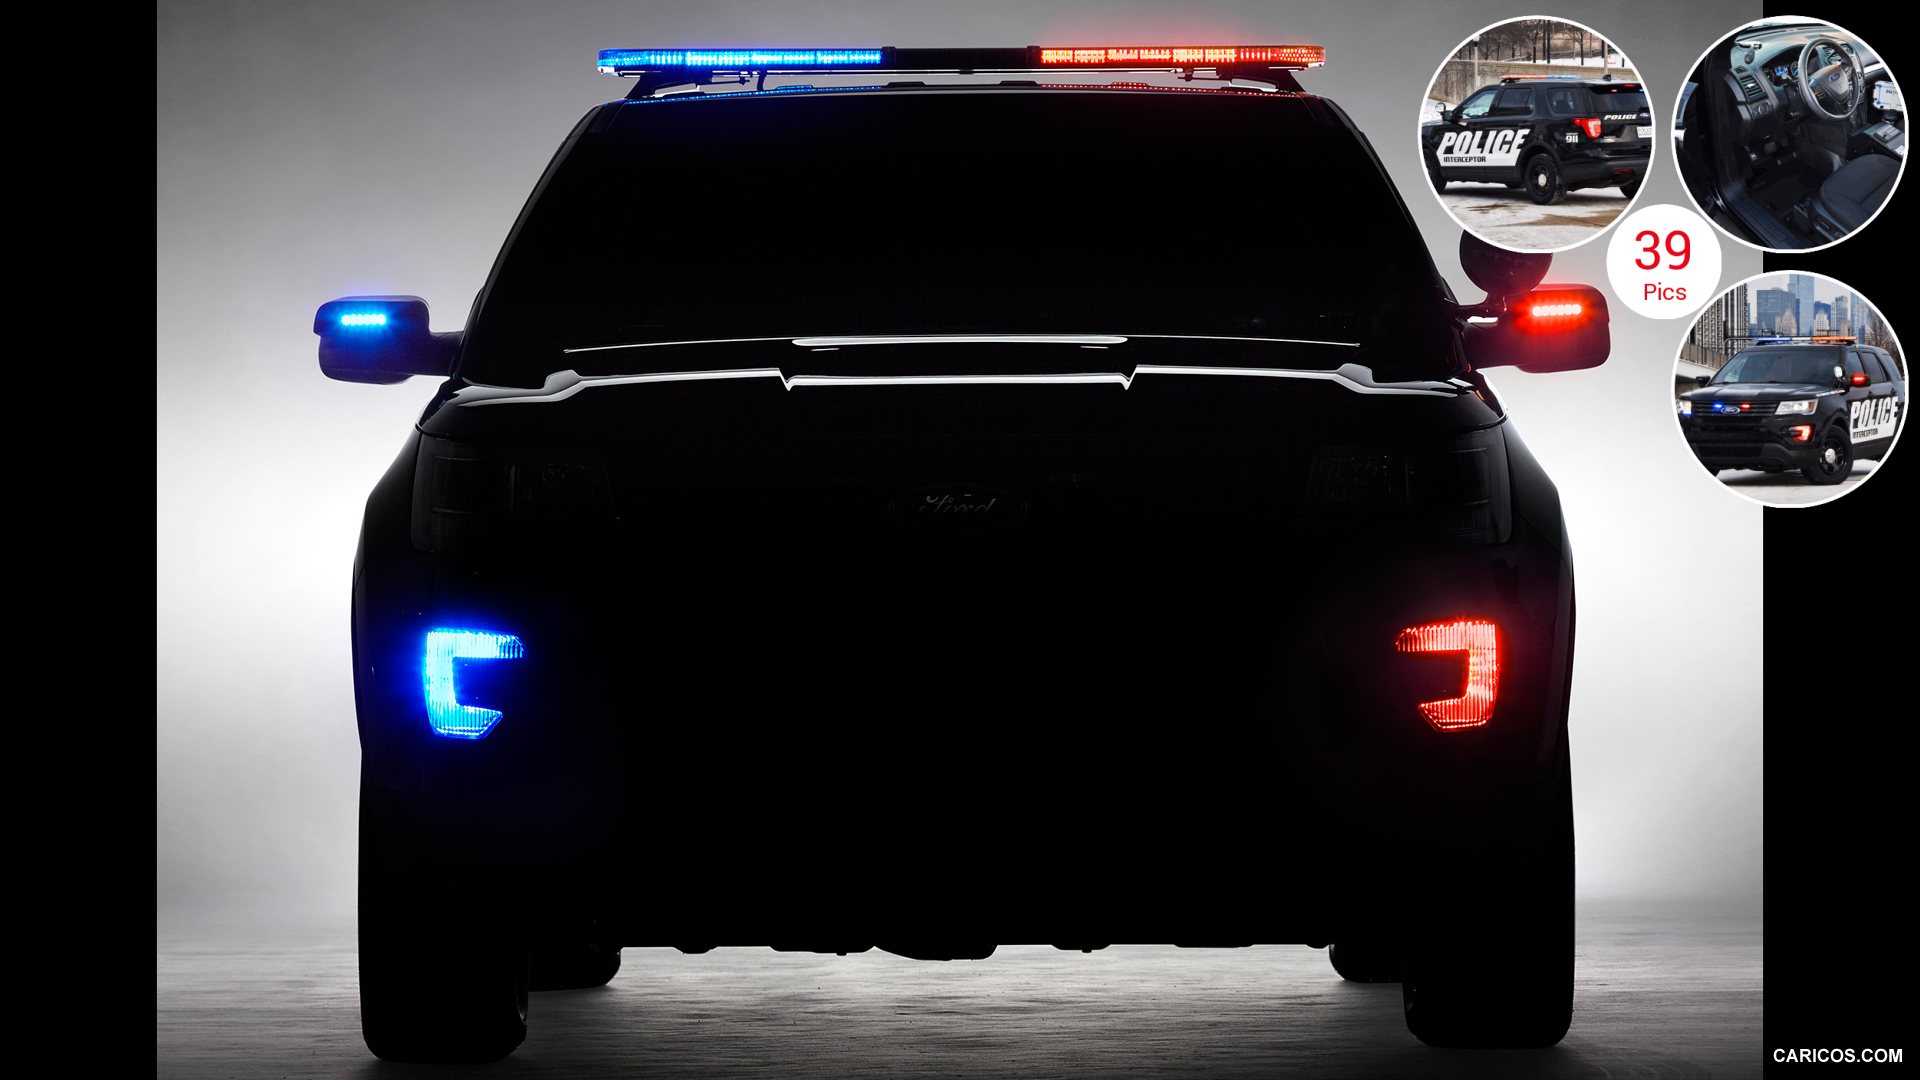 2016 Ford Police Interceptor Utility - Ford Explorer Police Front - HD Wallpaper 